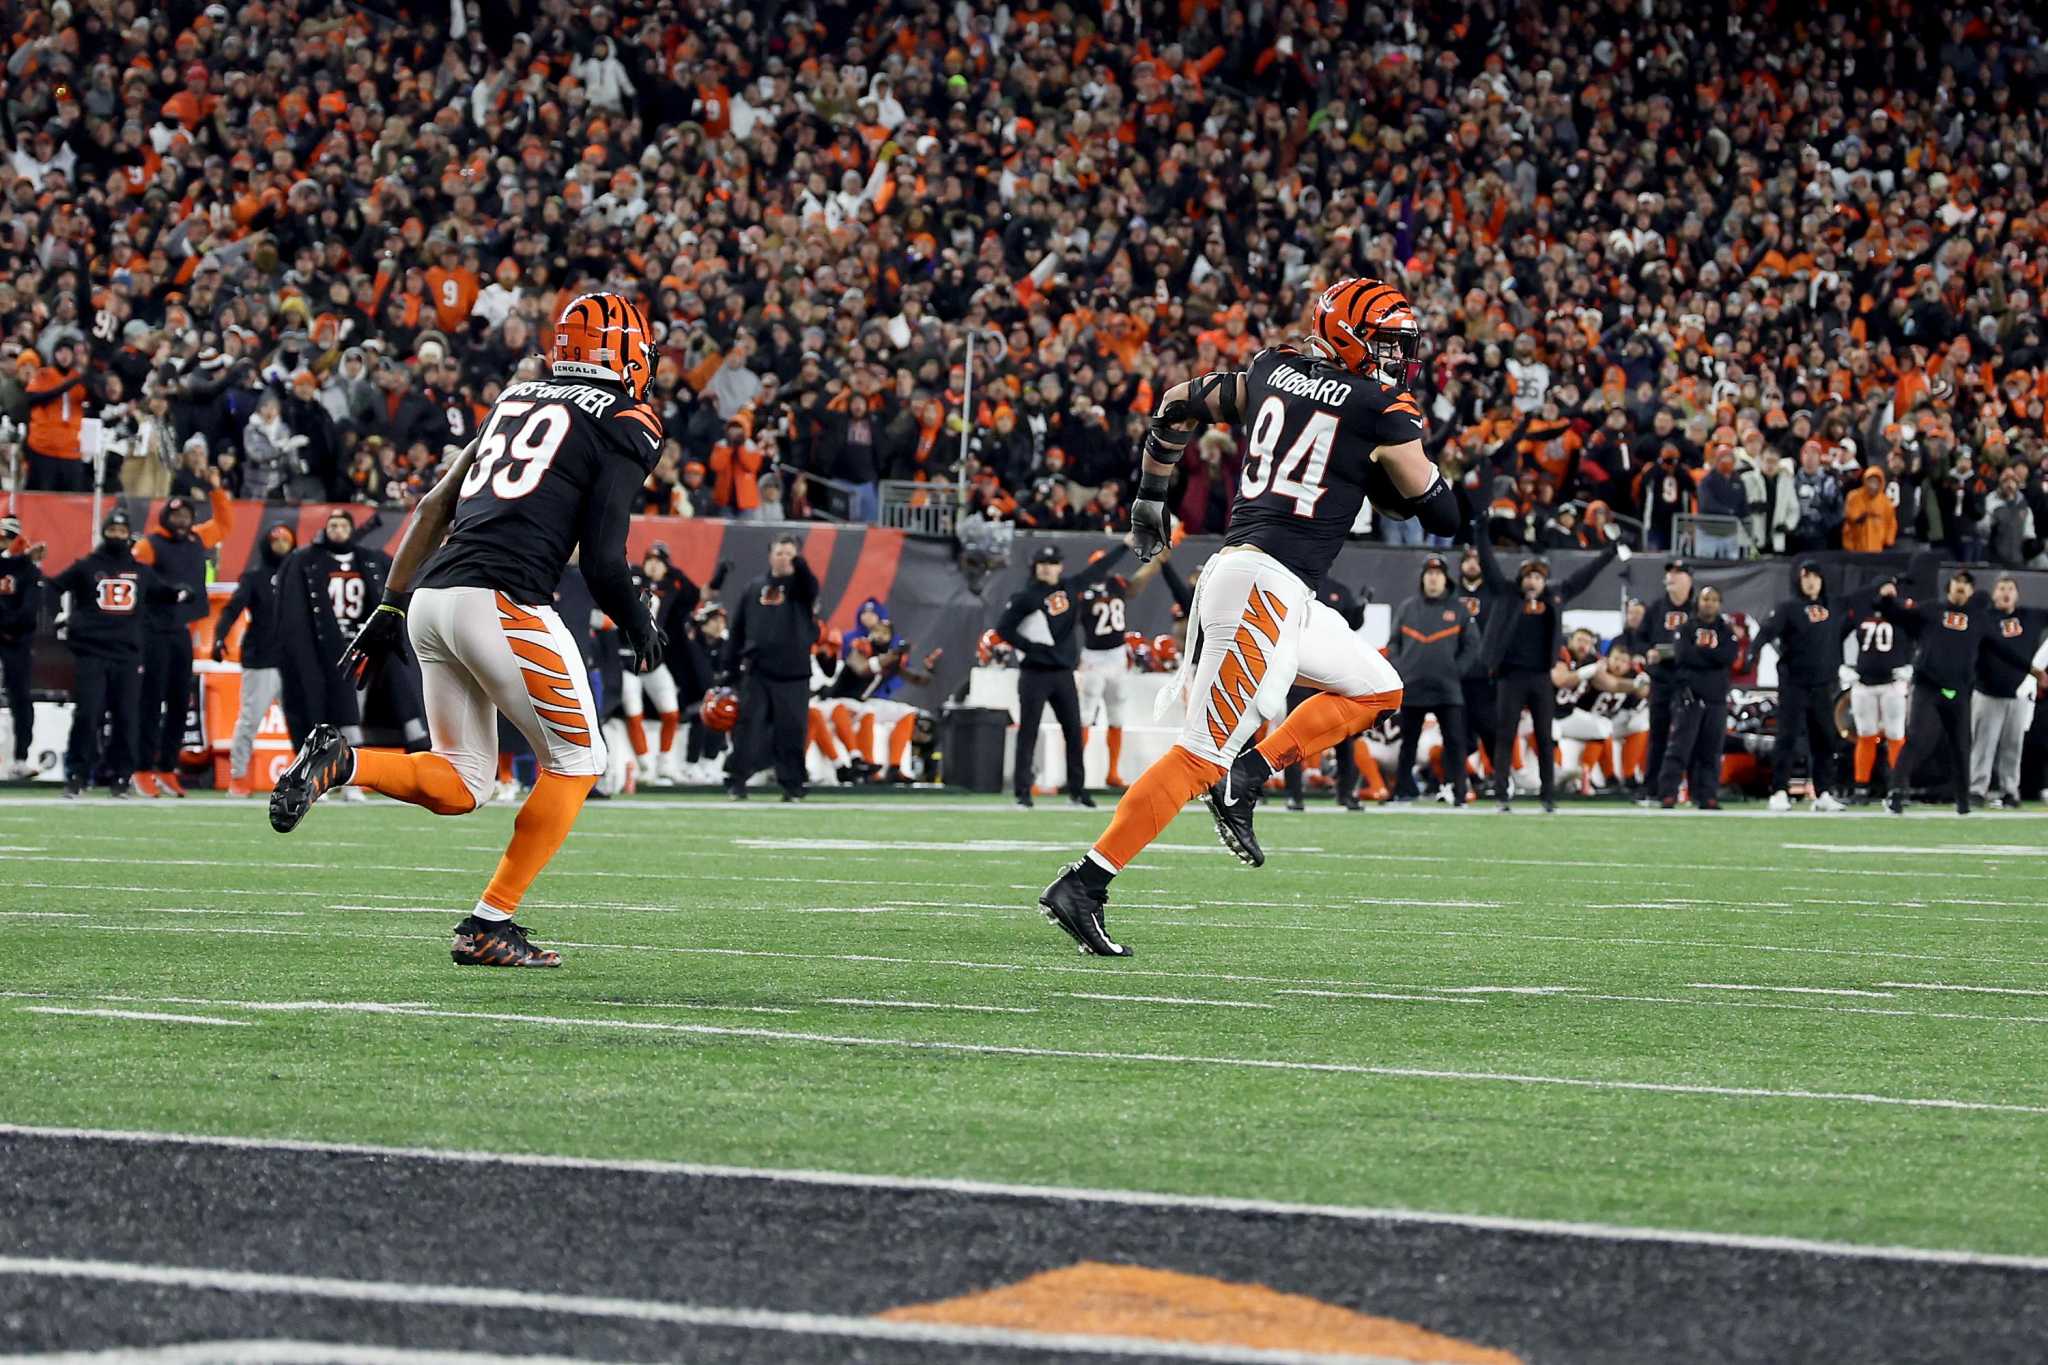 Hubbard's fumble return gives Bengals 24-17 win over Ravens - The